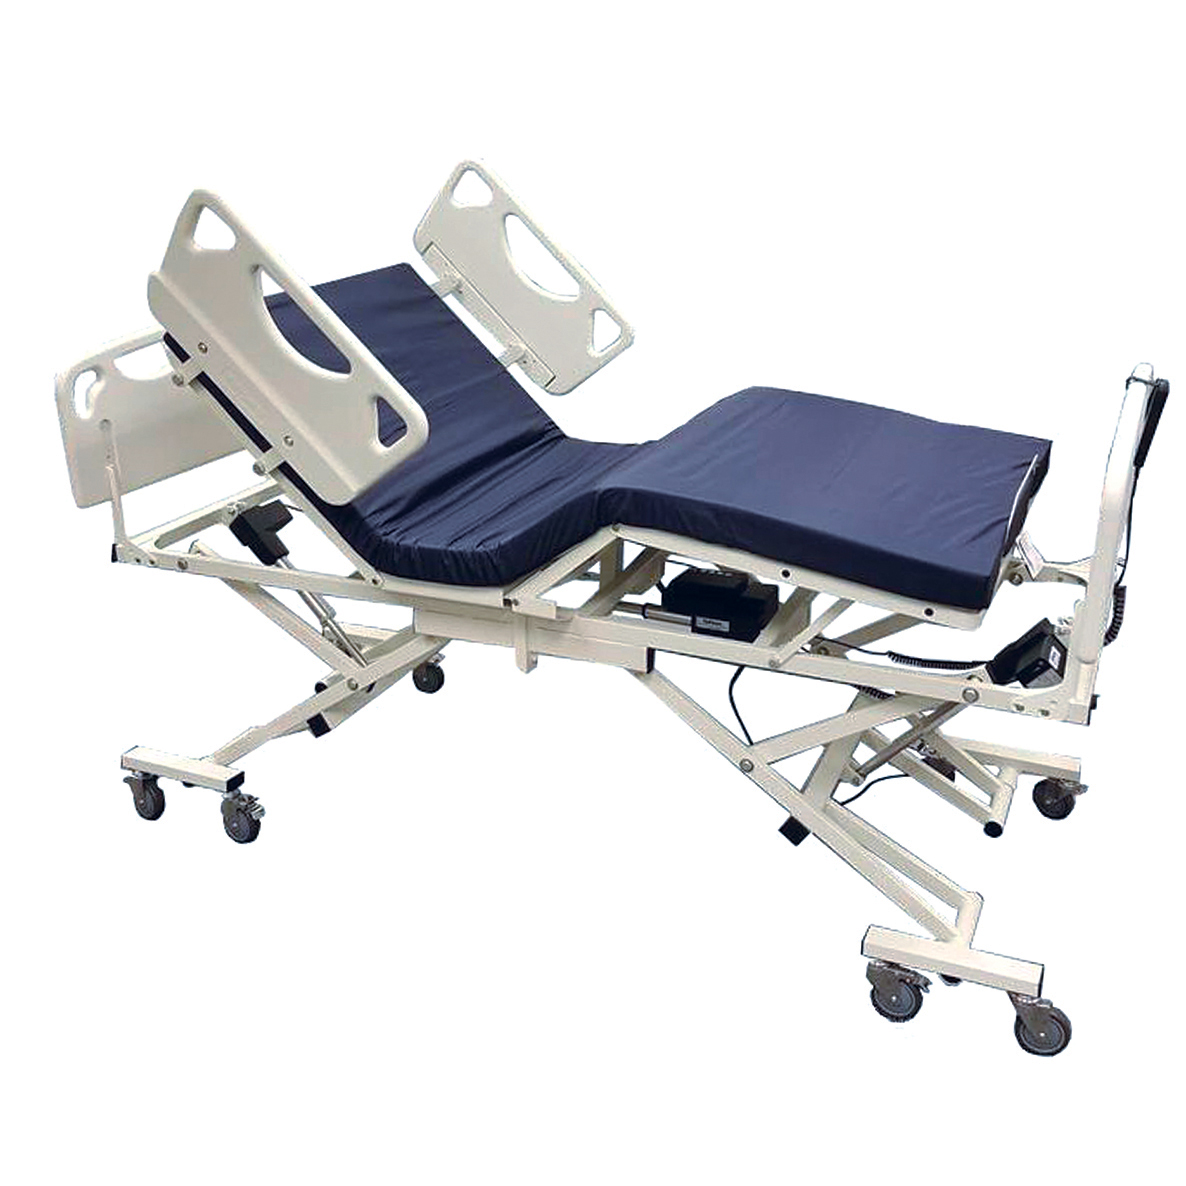 Fullerton heavy duty extra wide large bariatric adjustable hospital bed